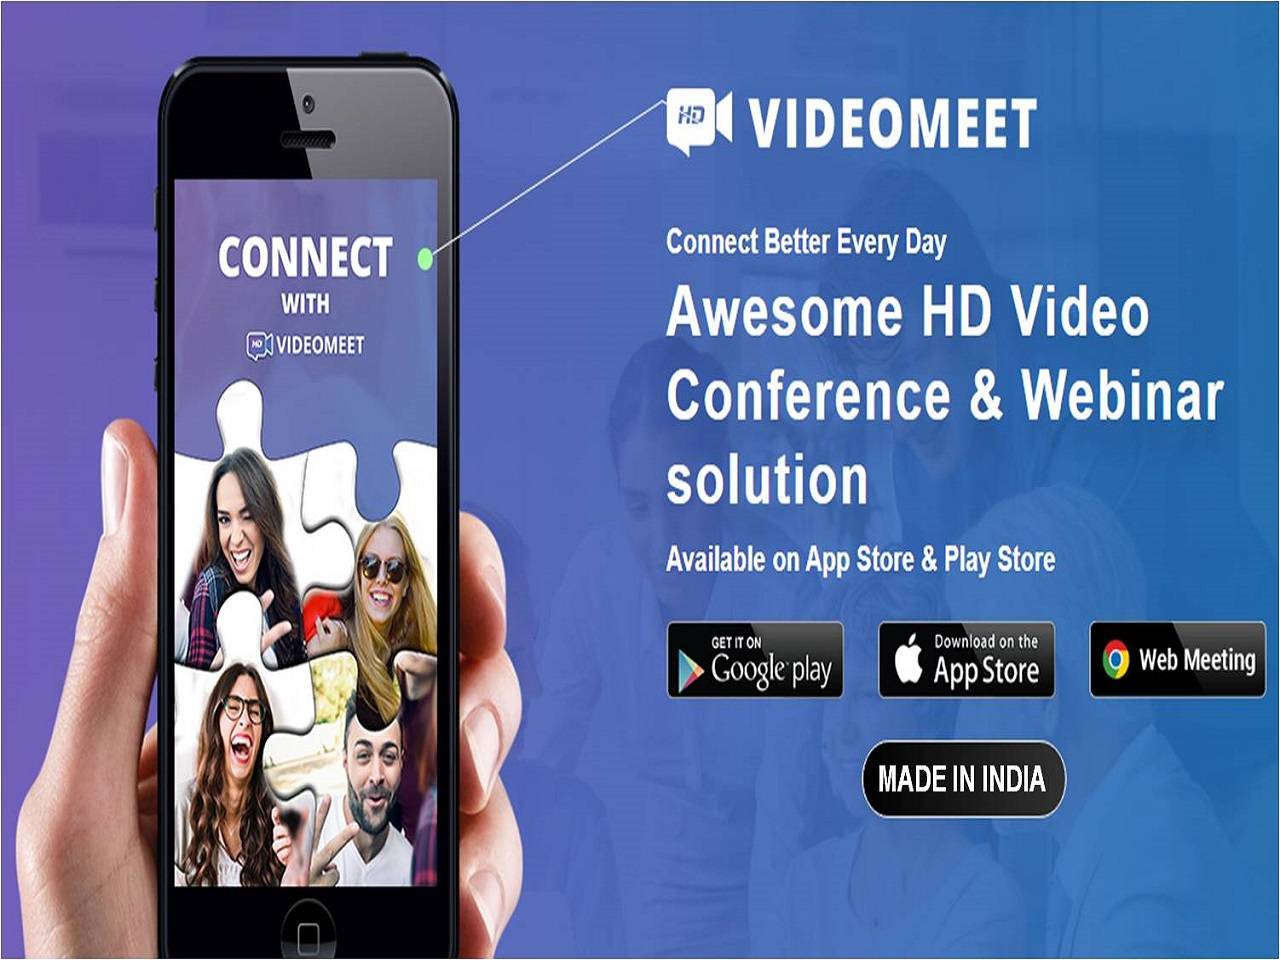 Made in India | VIDEOMEET empowers schools and colleges for online classes and e-learning